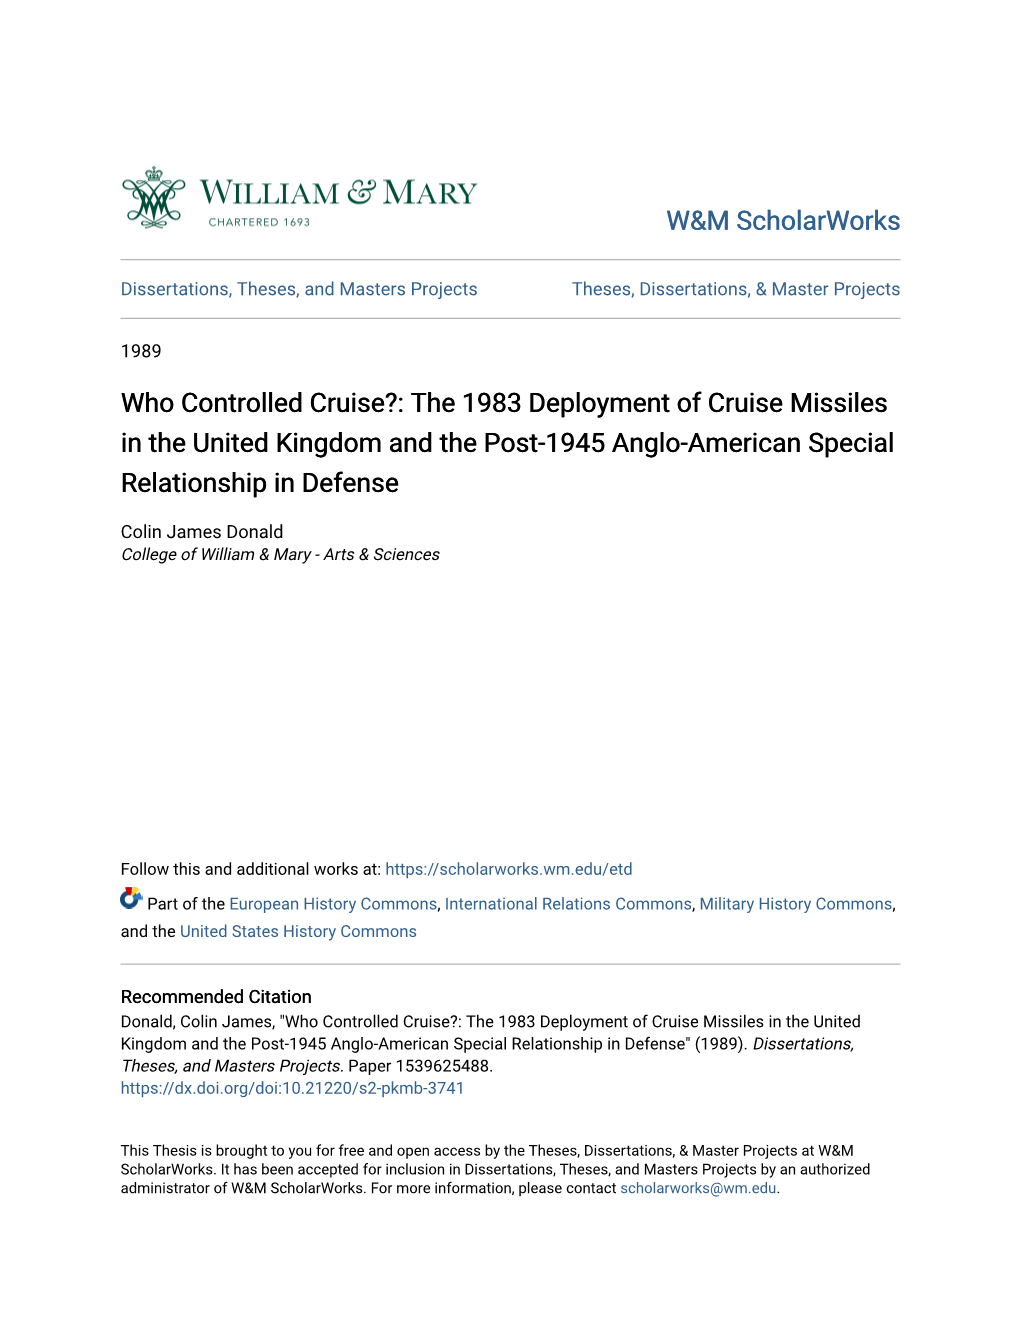 The 1983 Deployment of Cruise Missiles in the United Kingdom and the Post-1945 Anglo-American Special Relationship in Defense